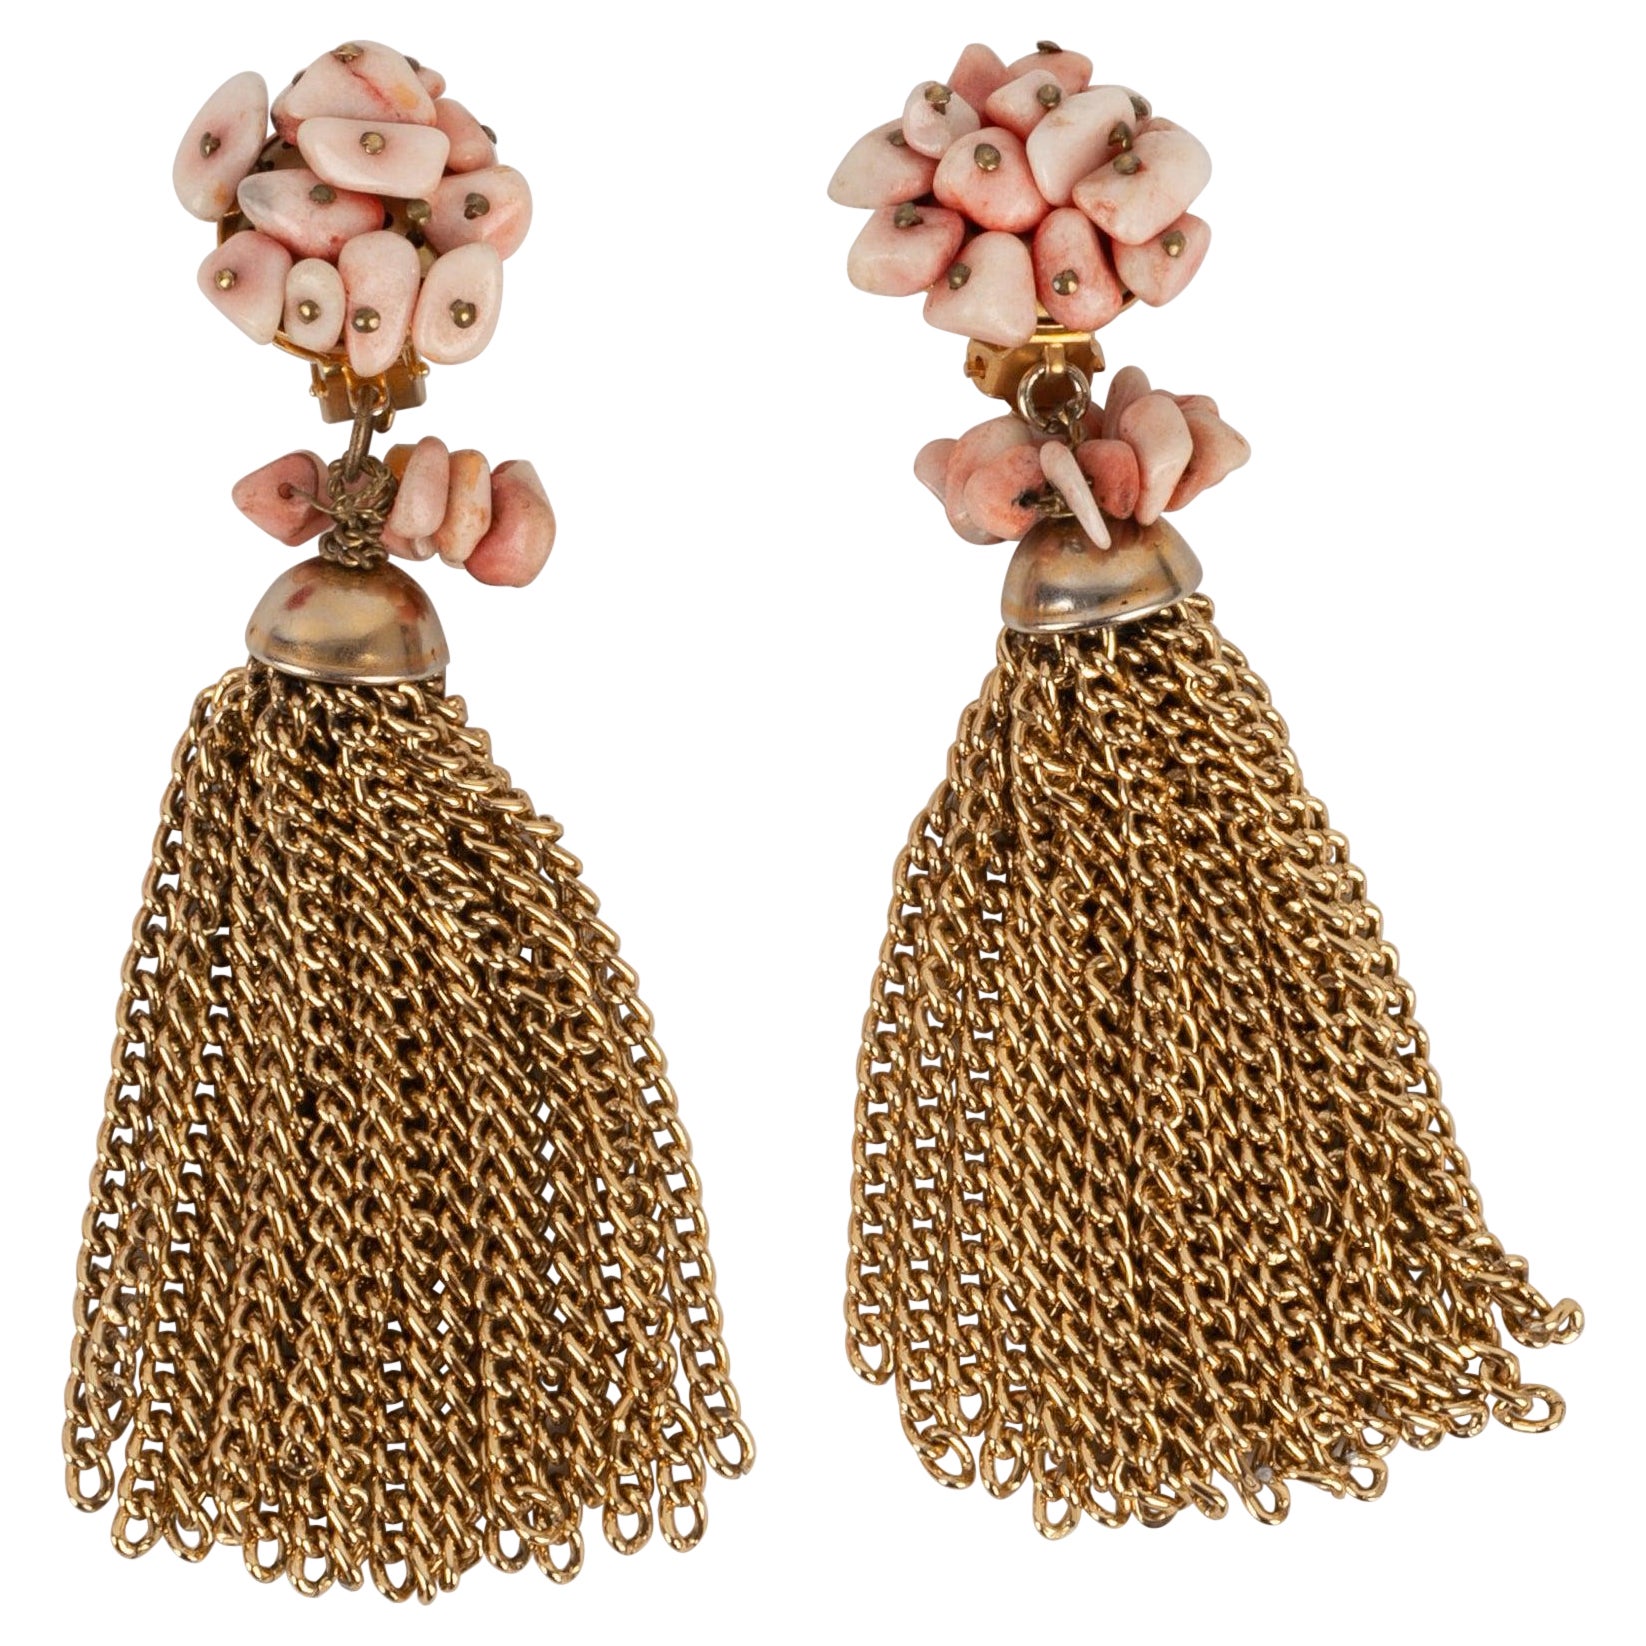 Paco Rabanne Golden Metal Earrings with Pale Pink Stones